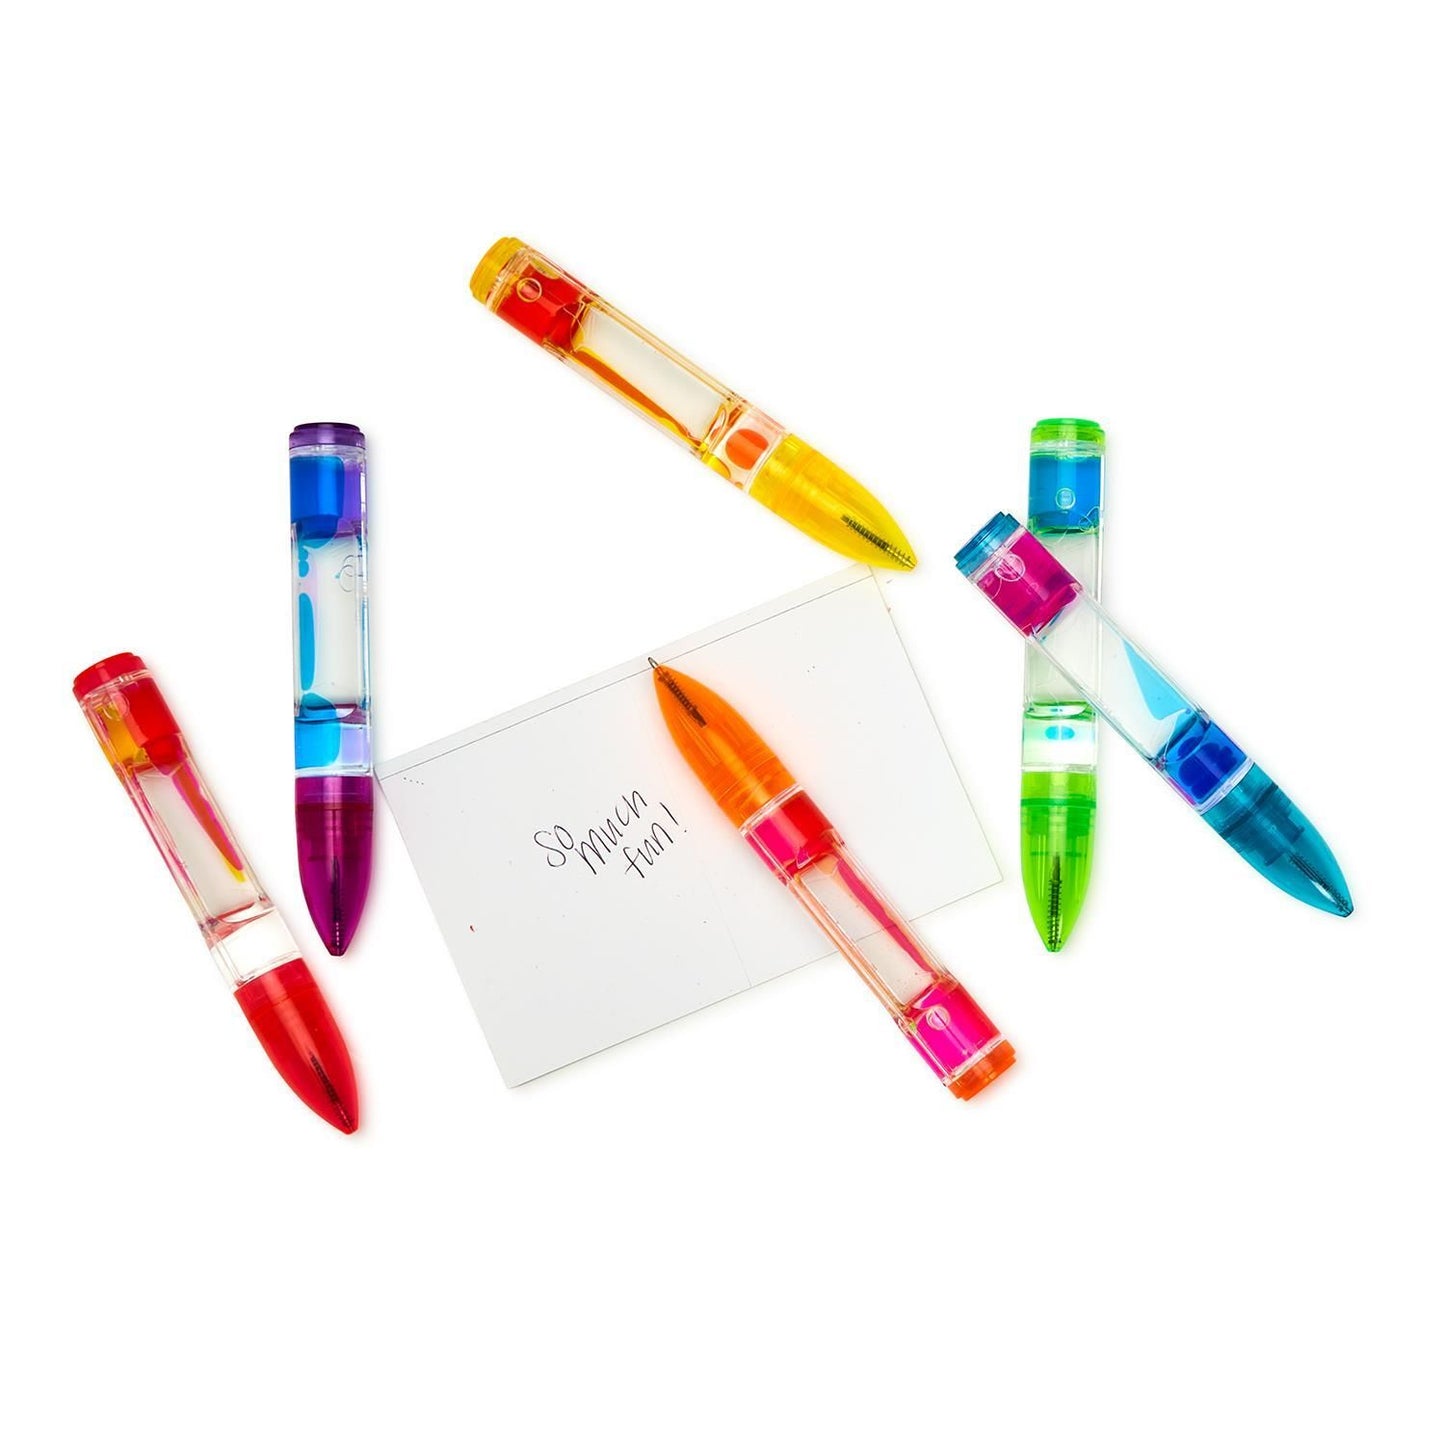 Two's Company Refill For Motion Drops 24-Pieces Pen in 6 Colors